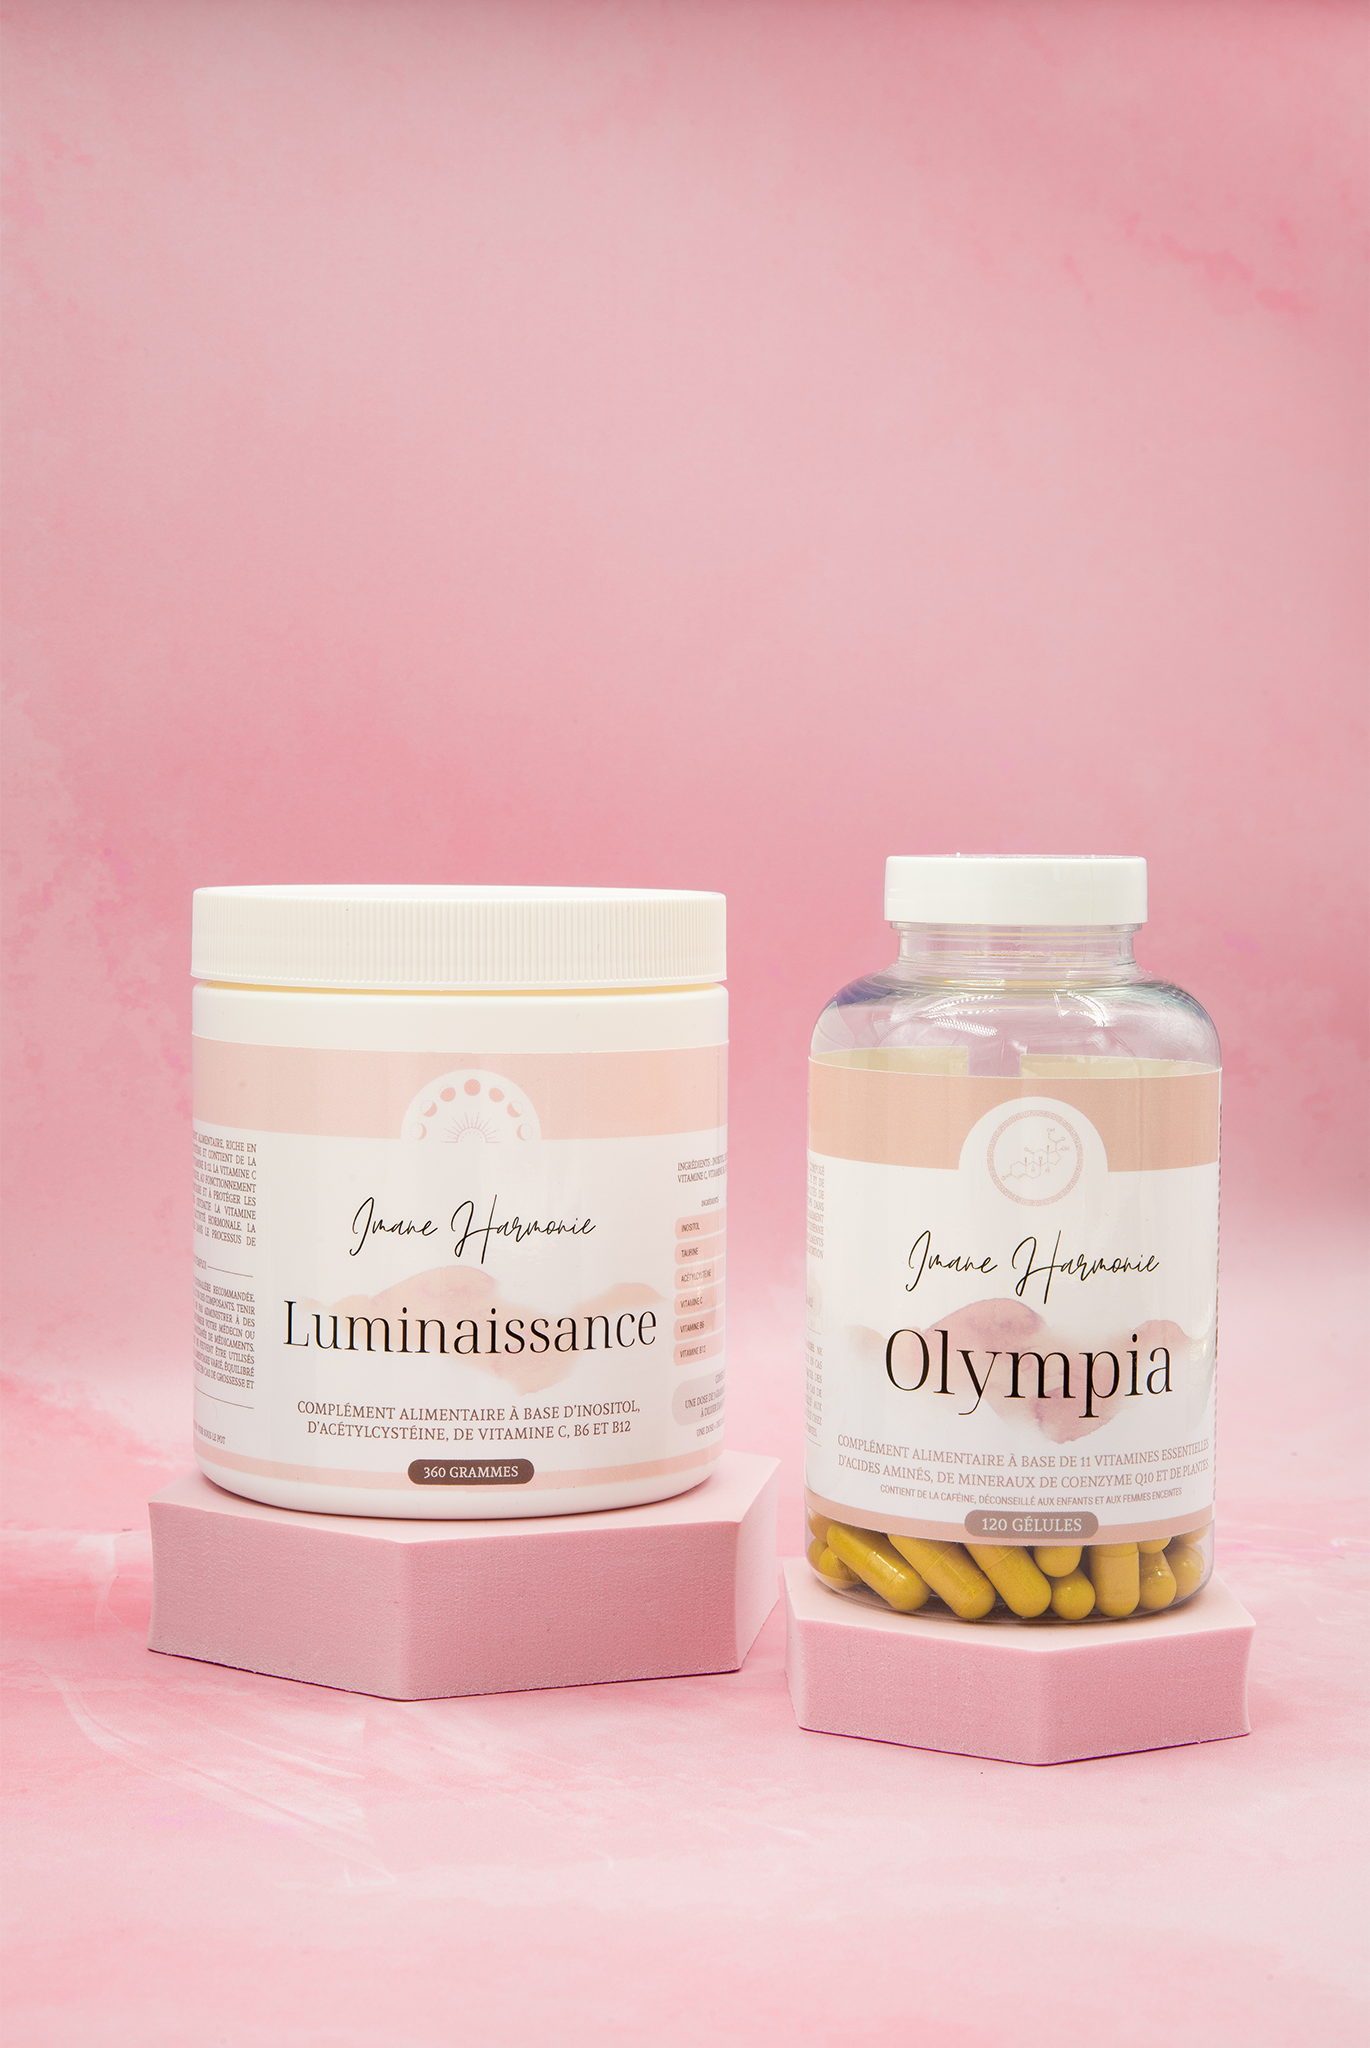  The vitality pack which contains Luminaissance and Olympia